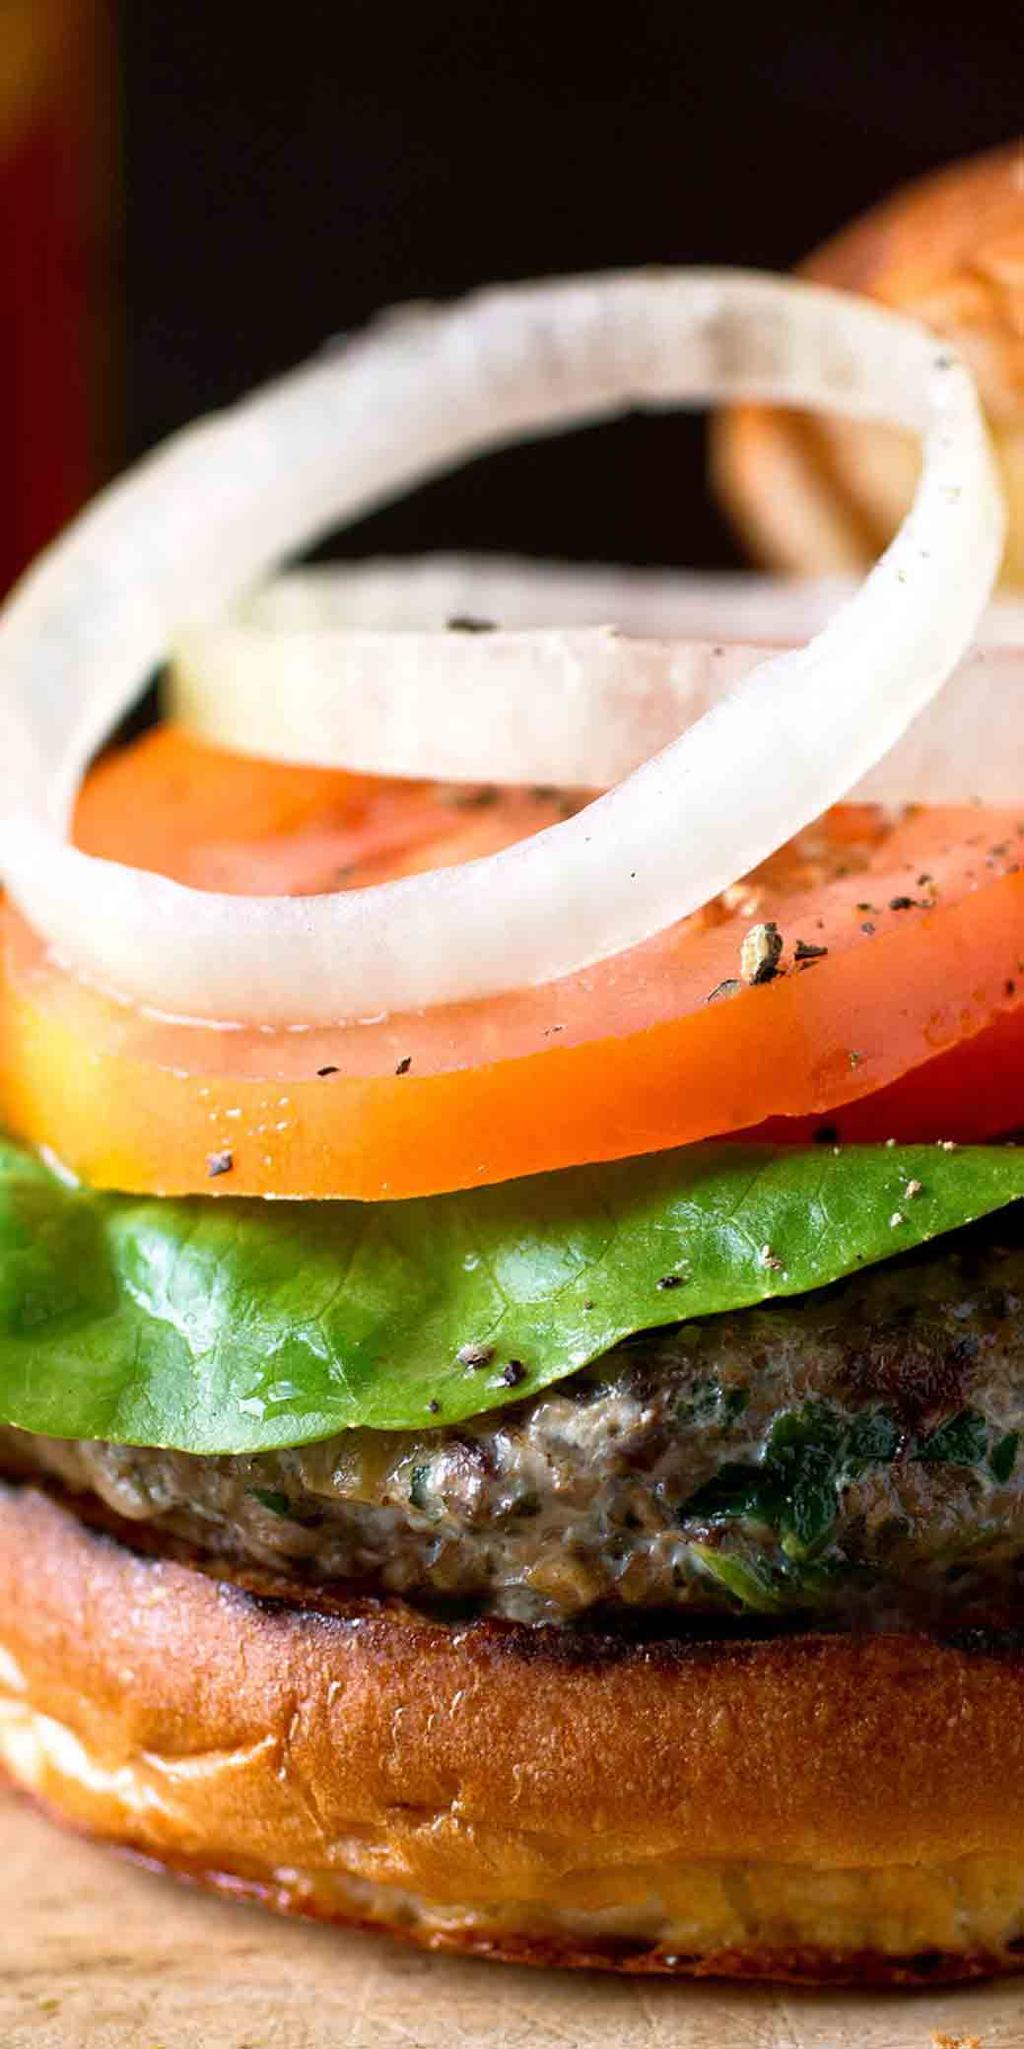 BEEF BURGER 1 wholegrain or sourdough roll 150g lean beef mince 1 egg white ¼ onion, finely diced 1 handful flat leaf parsley, chopped 1 slice low fat cheese Salt and pepper to season 1 tablespoon